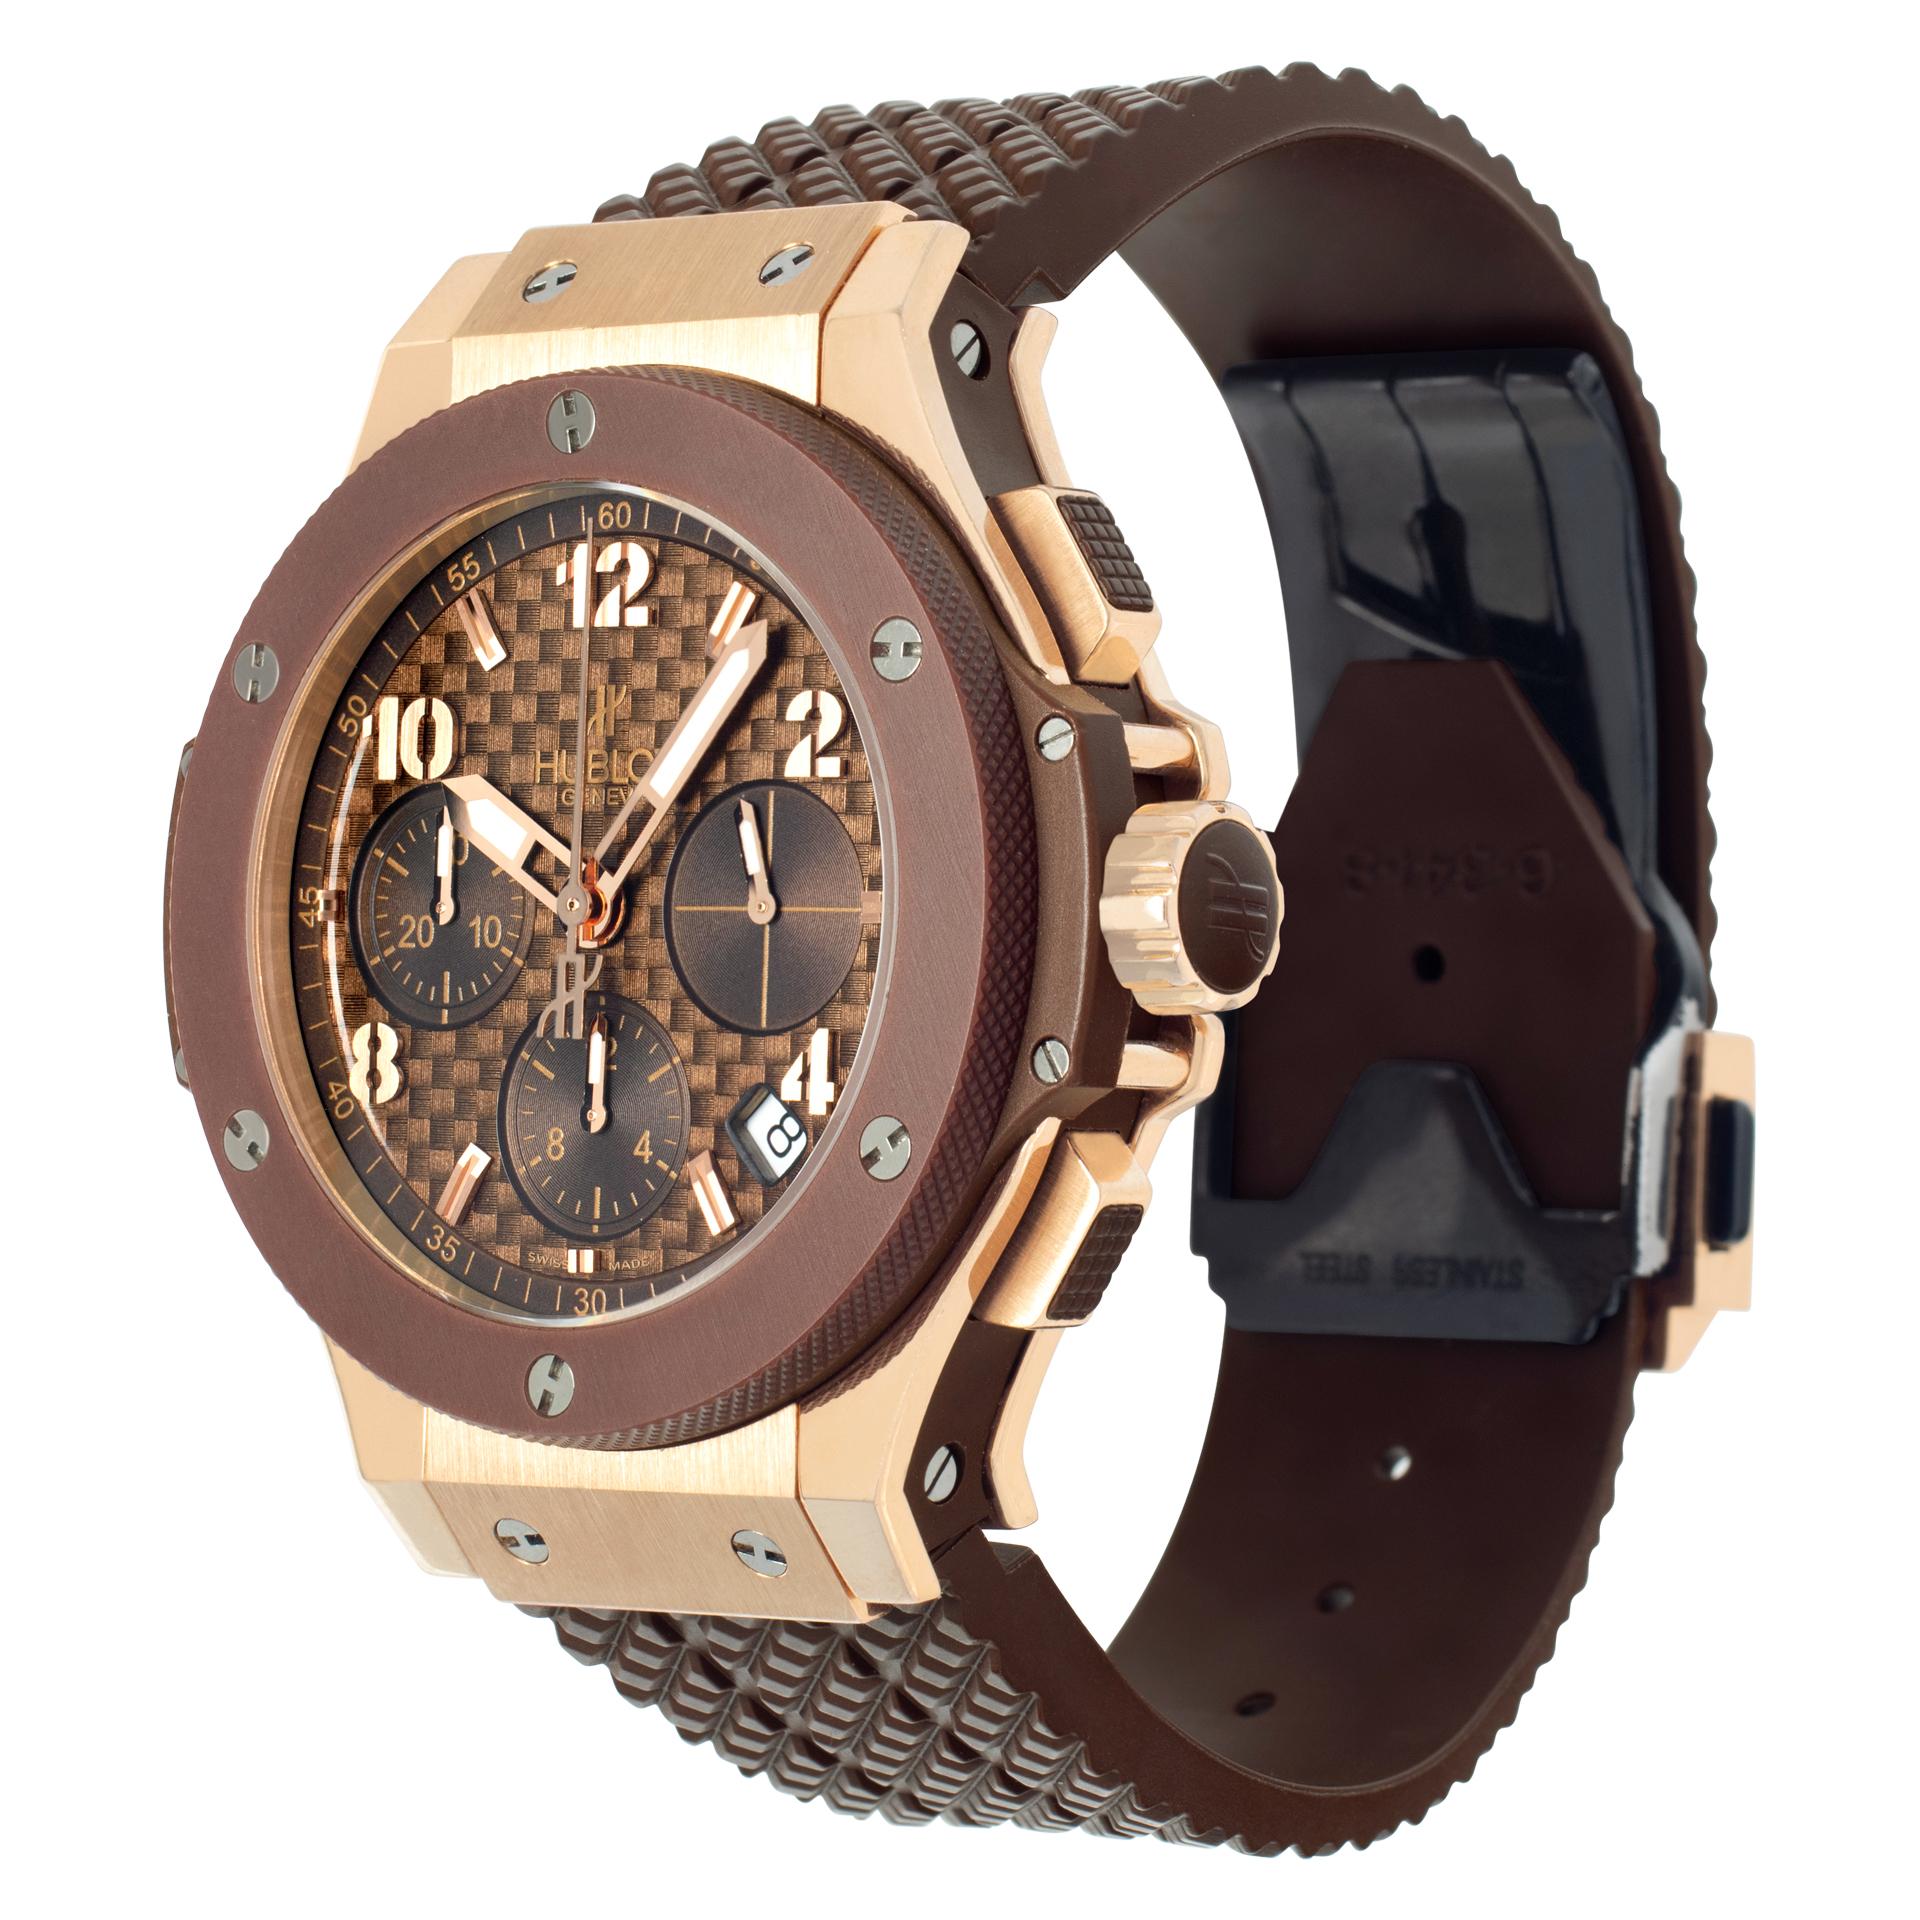 Hublot Big Bang Capuccino in 18k rose gold & ceramic on a rubber strap. Automatic movement under glass w/ subseconds, date and chronograph. 41 mm case size. With box and papers circa 2010s. Ref 341.PC.1007.RX. Fine Pre-owned Hublot Watch. Certified